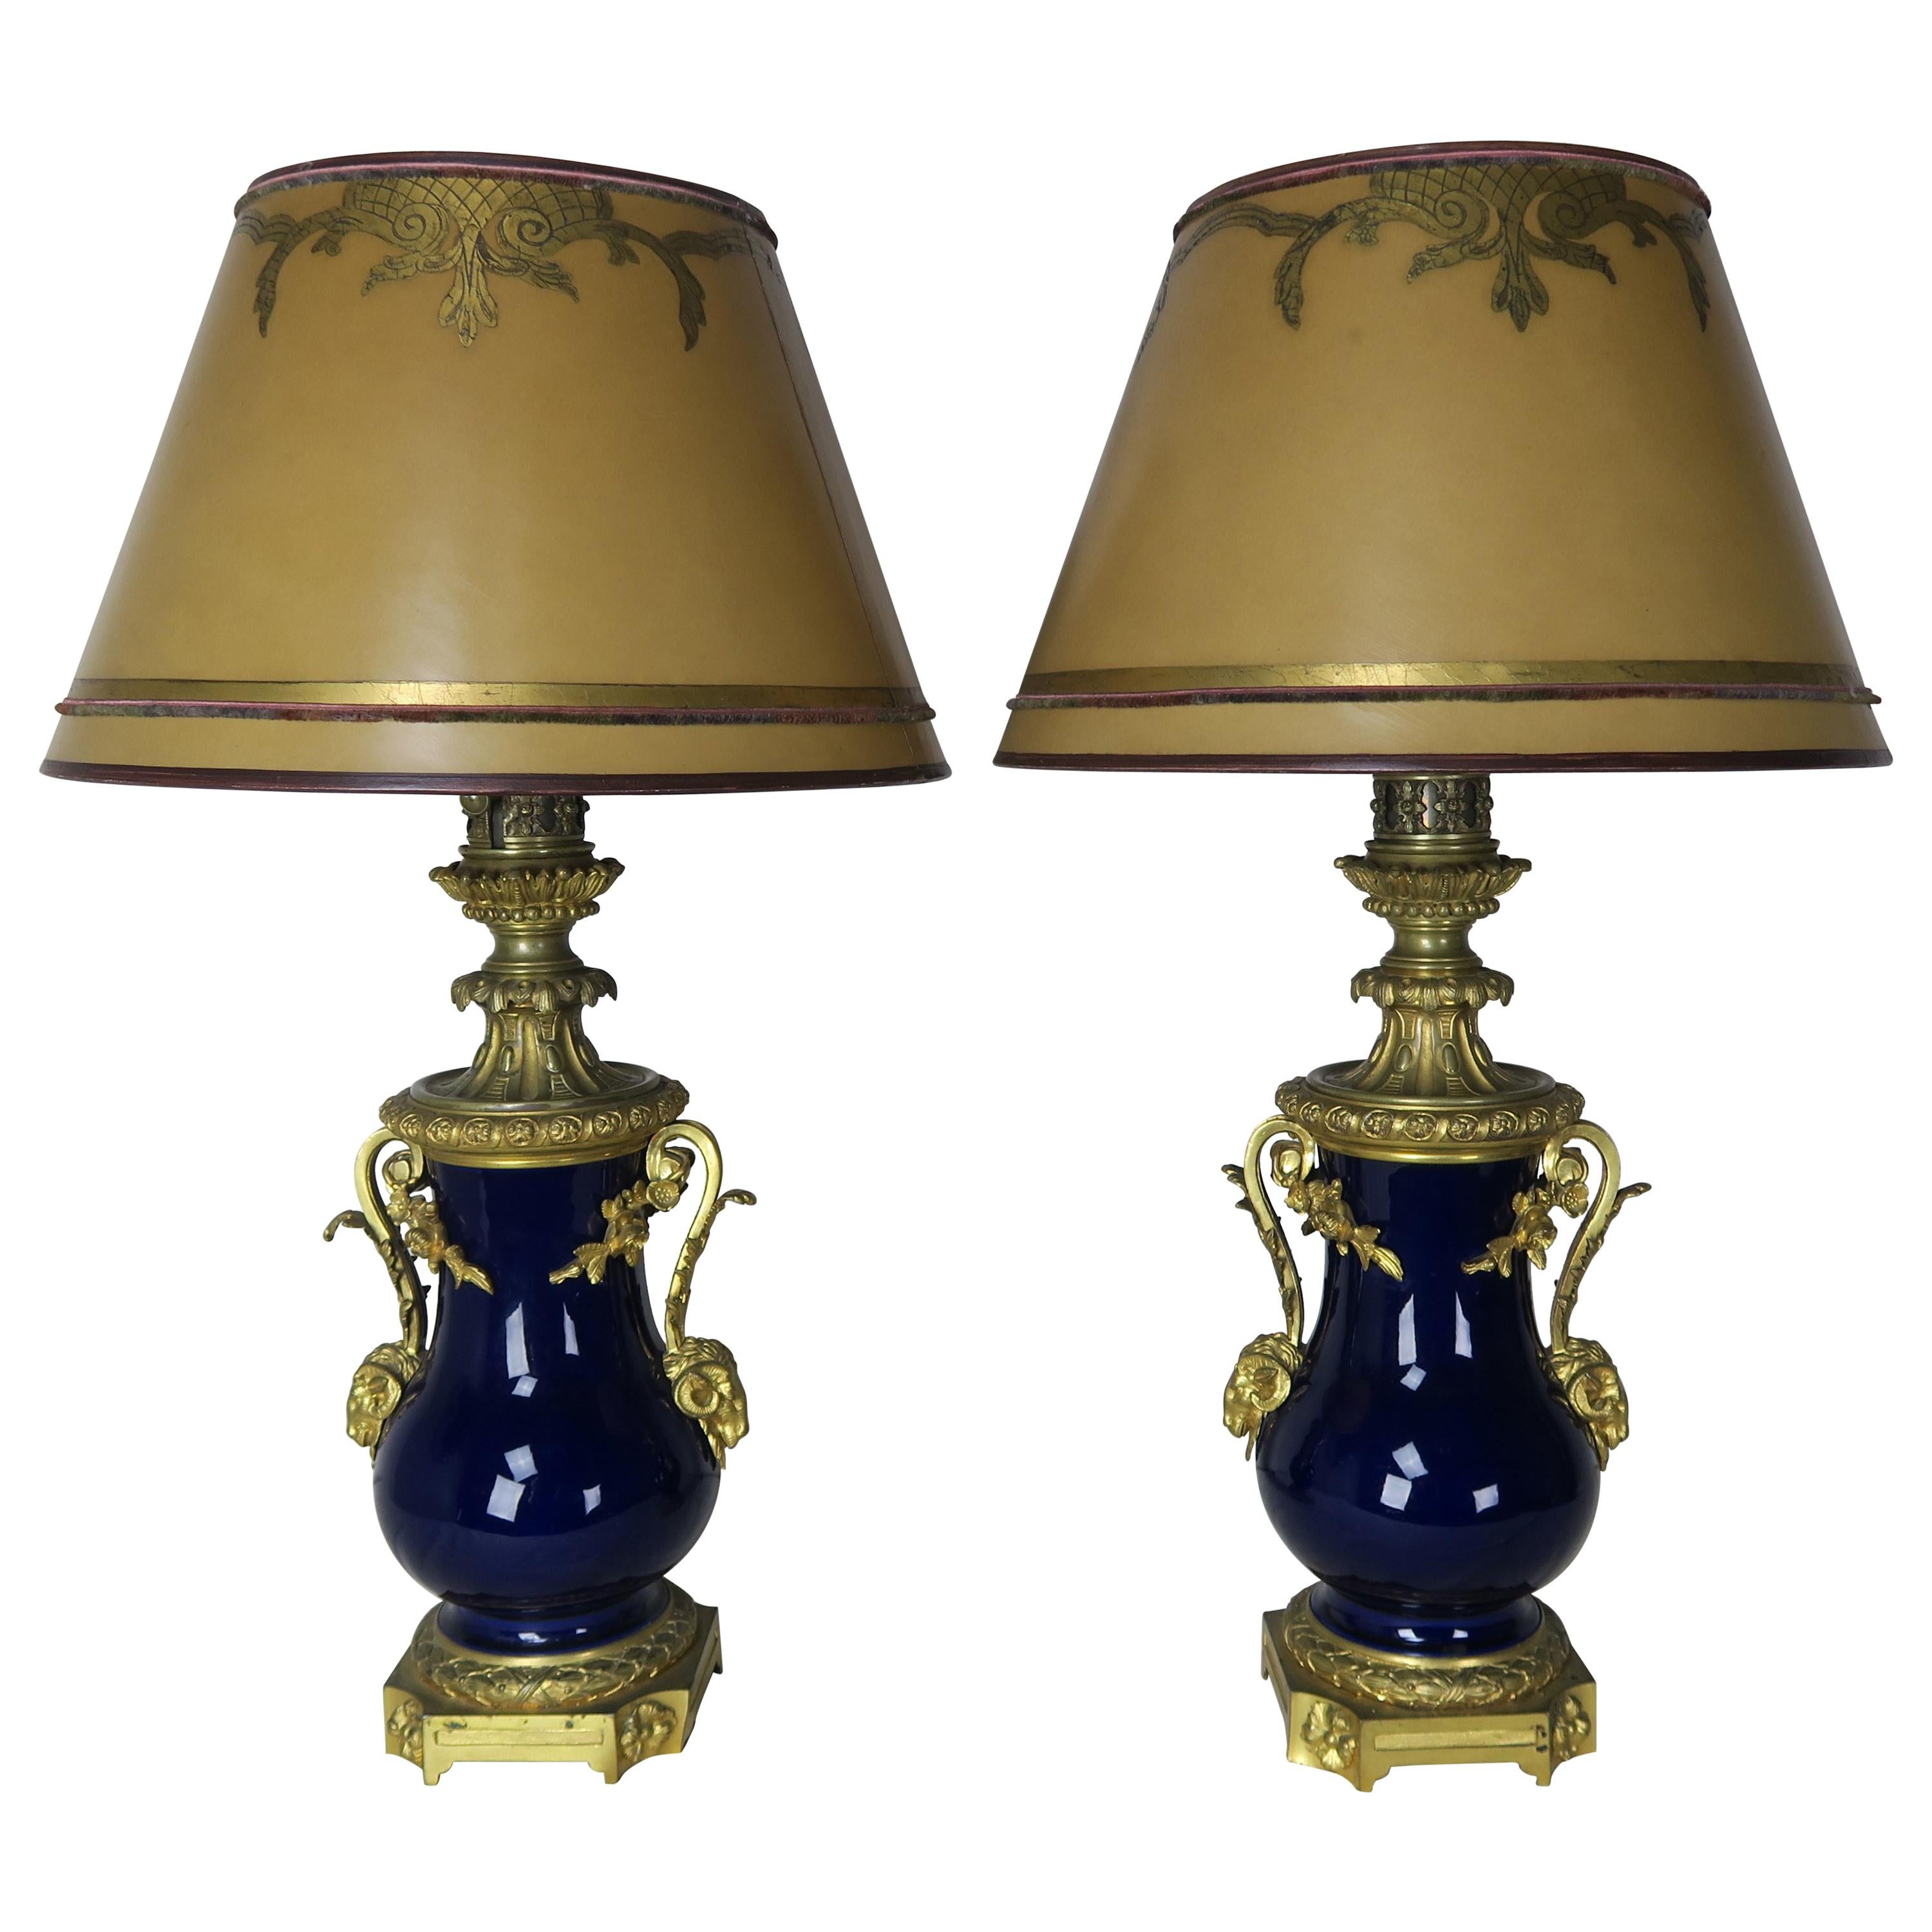 Pair of French Cobalt Blue Porcelain and Bronze Lamps with Parchment Shades